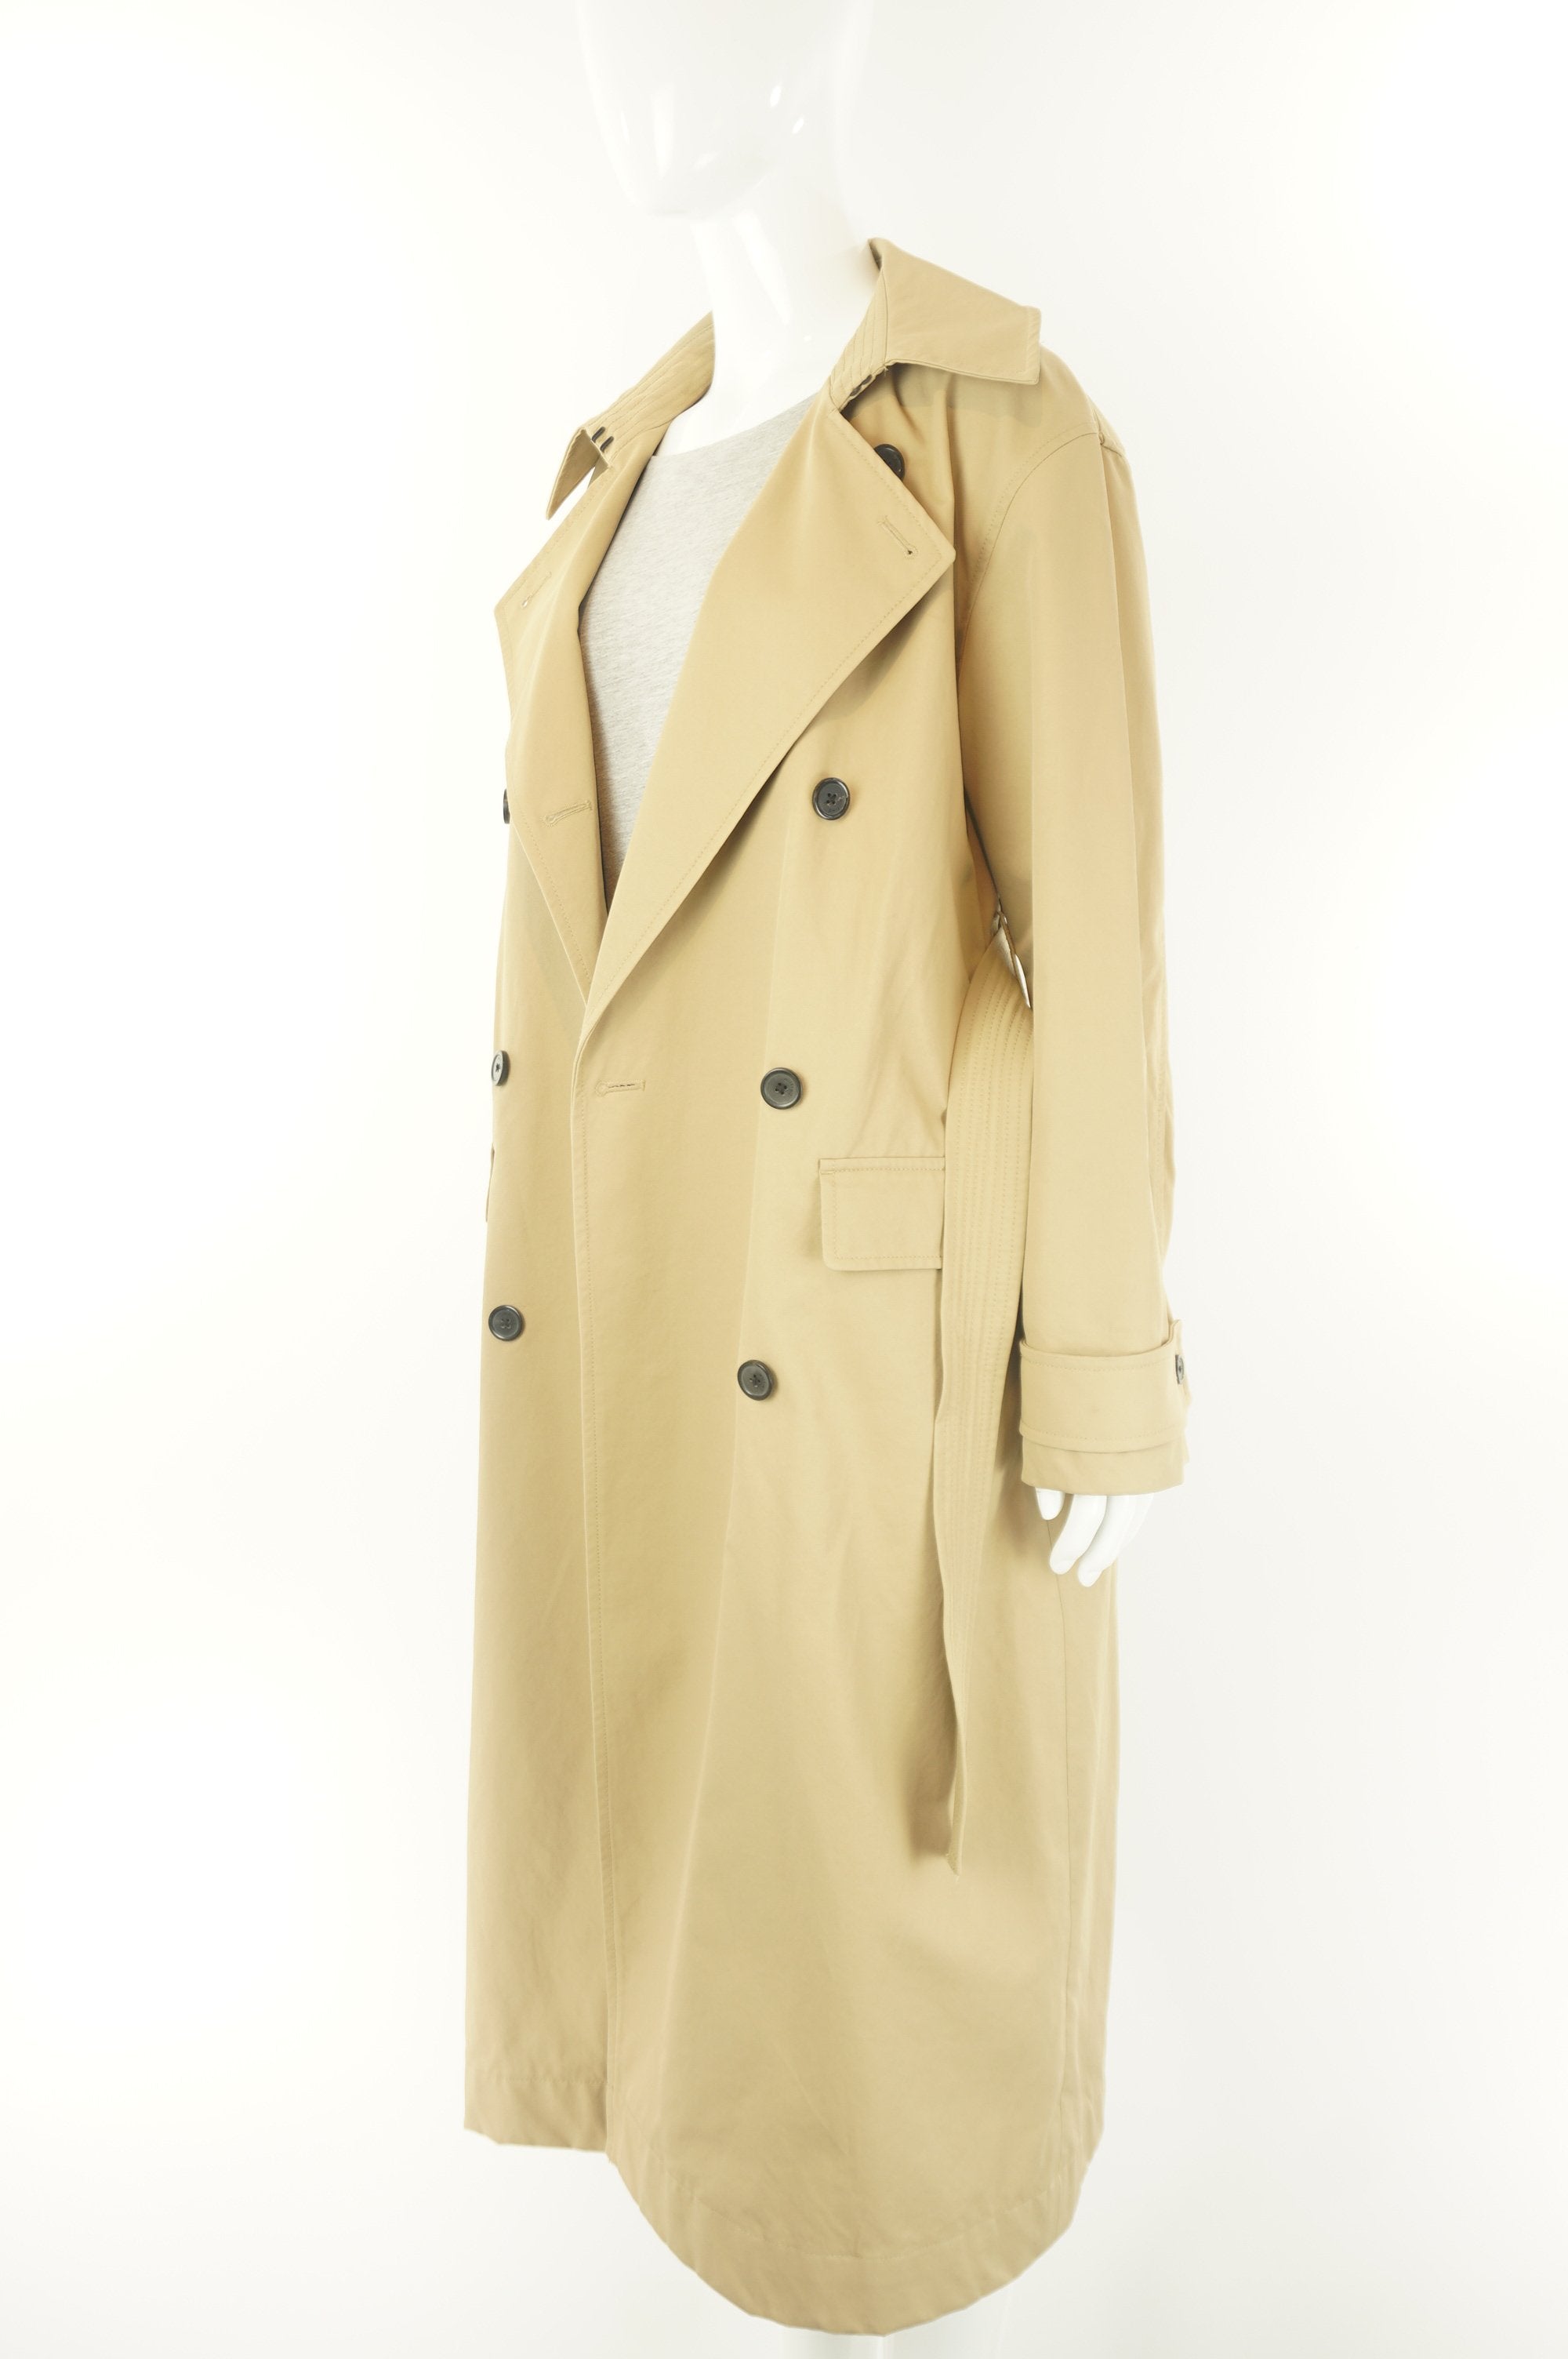 Wilfred Trench Coat, The classic looking trench coat that is perfect for spring! Belted and double breasted design. Fits better on a taller individual., Brown, 52% cotton. 48% Nylon, 